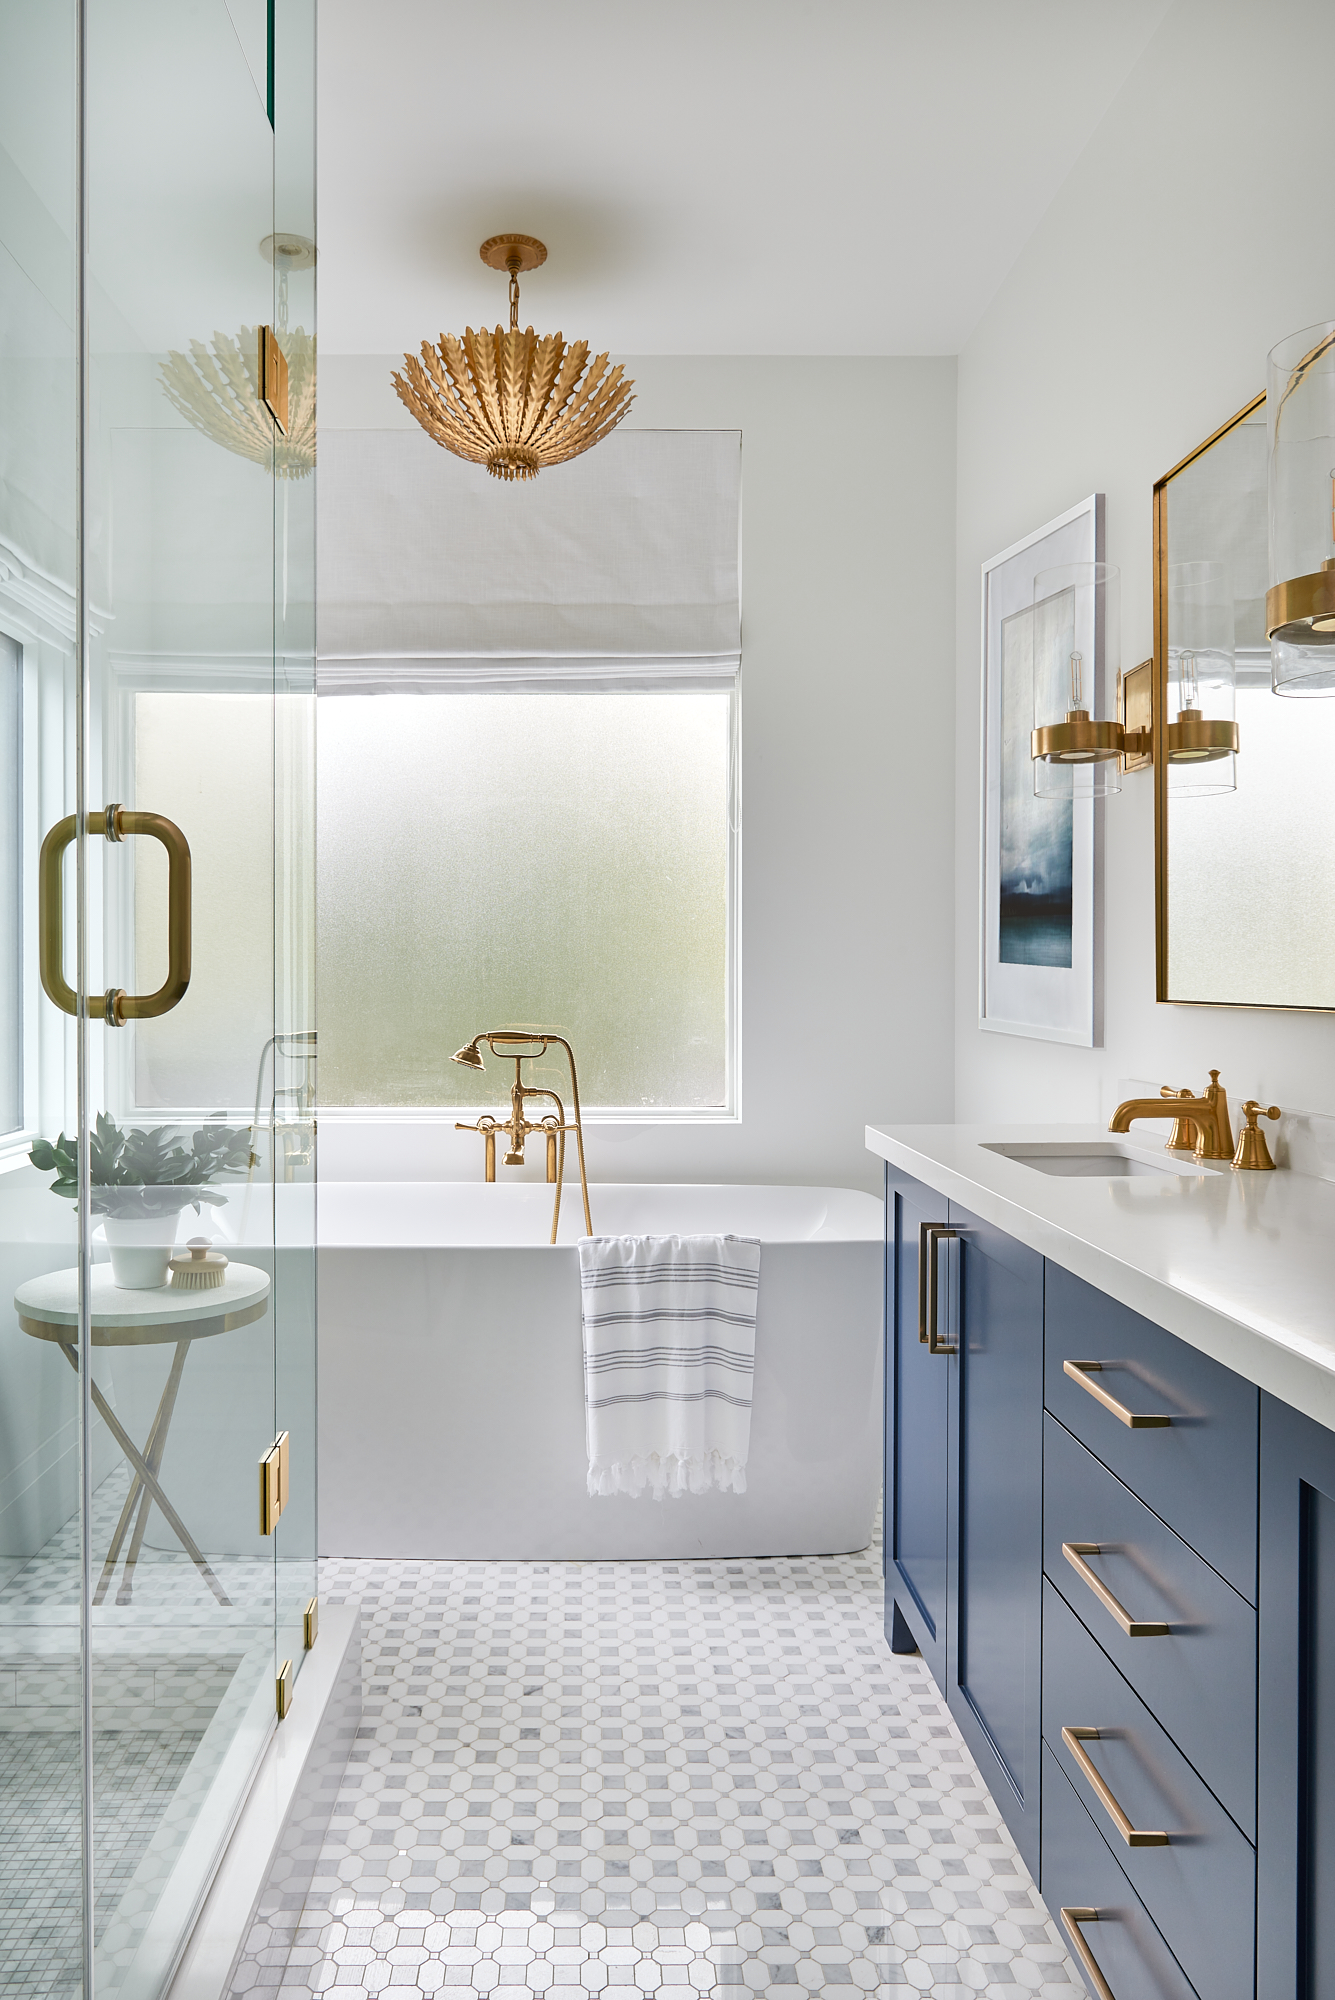 beautiful bathroom interior with soaker tub under a window, gold fixtures, and blue custom vanity